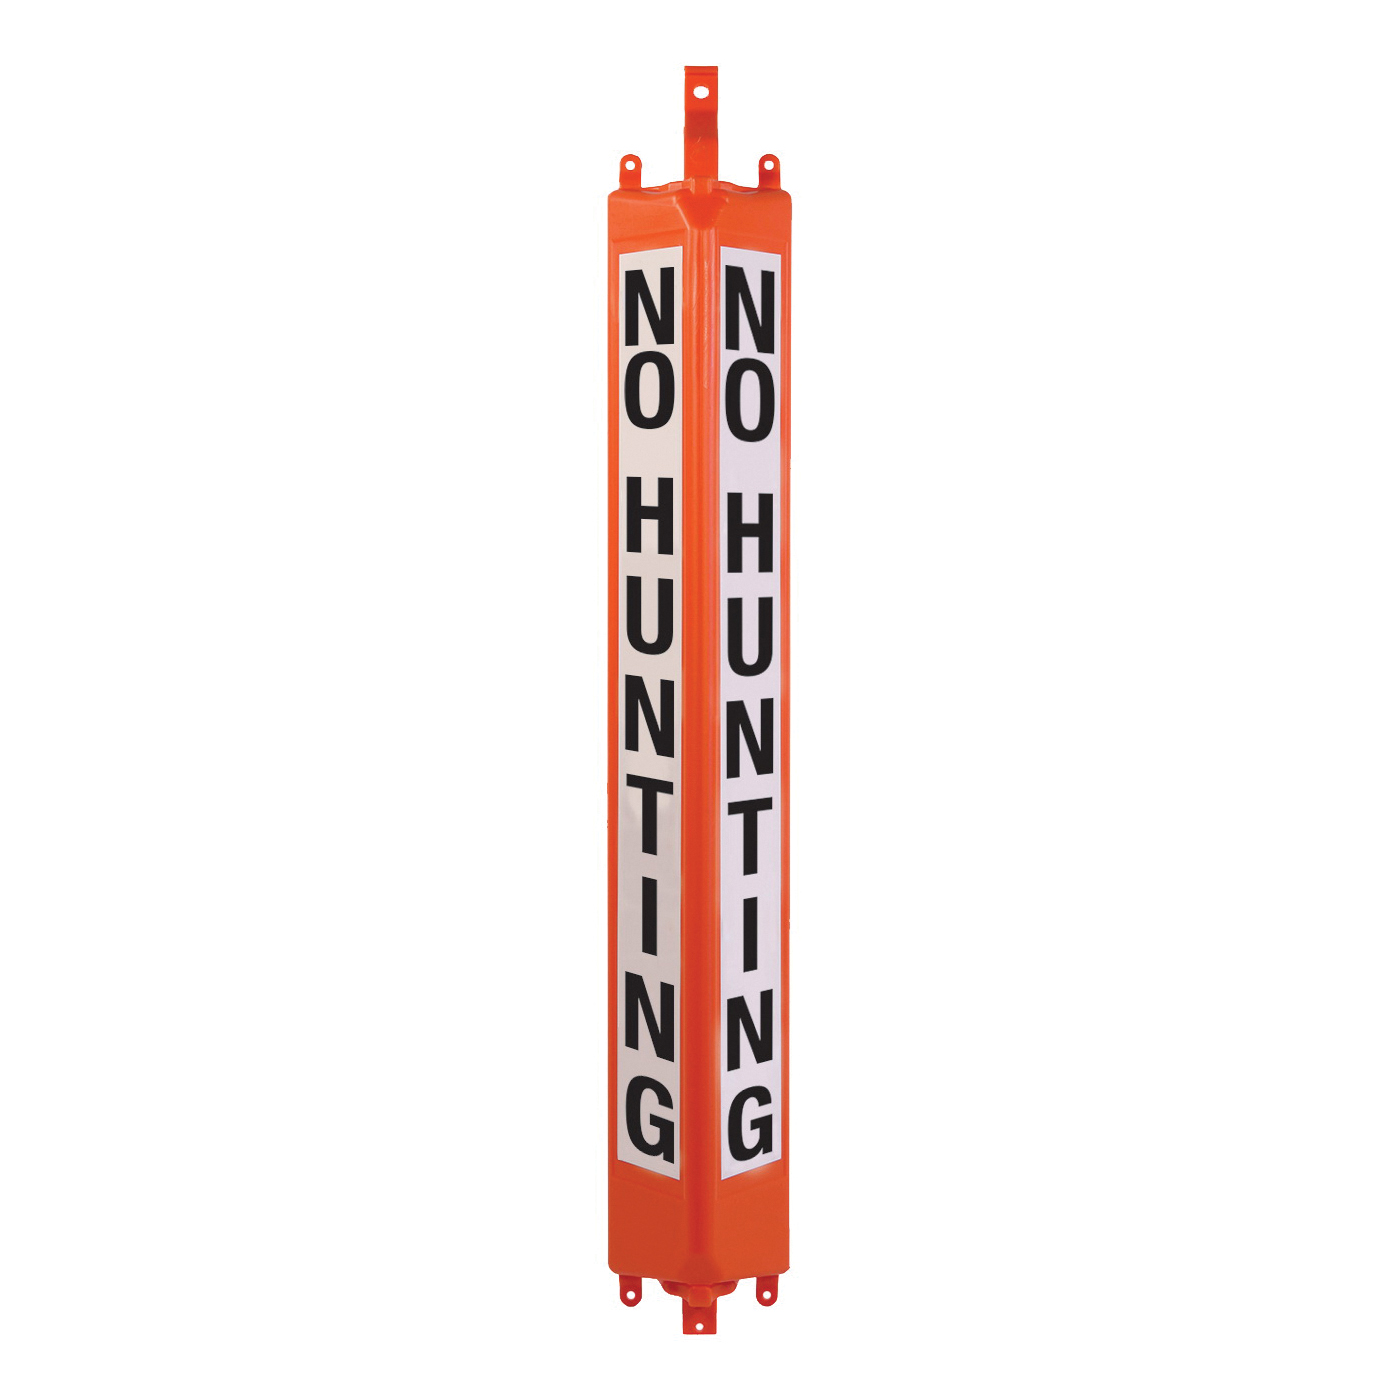 3DP-NH No-Hunting Sign, Plastic, Orange, For: Chain Link Fencing, Fence Posts and Trees